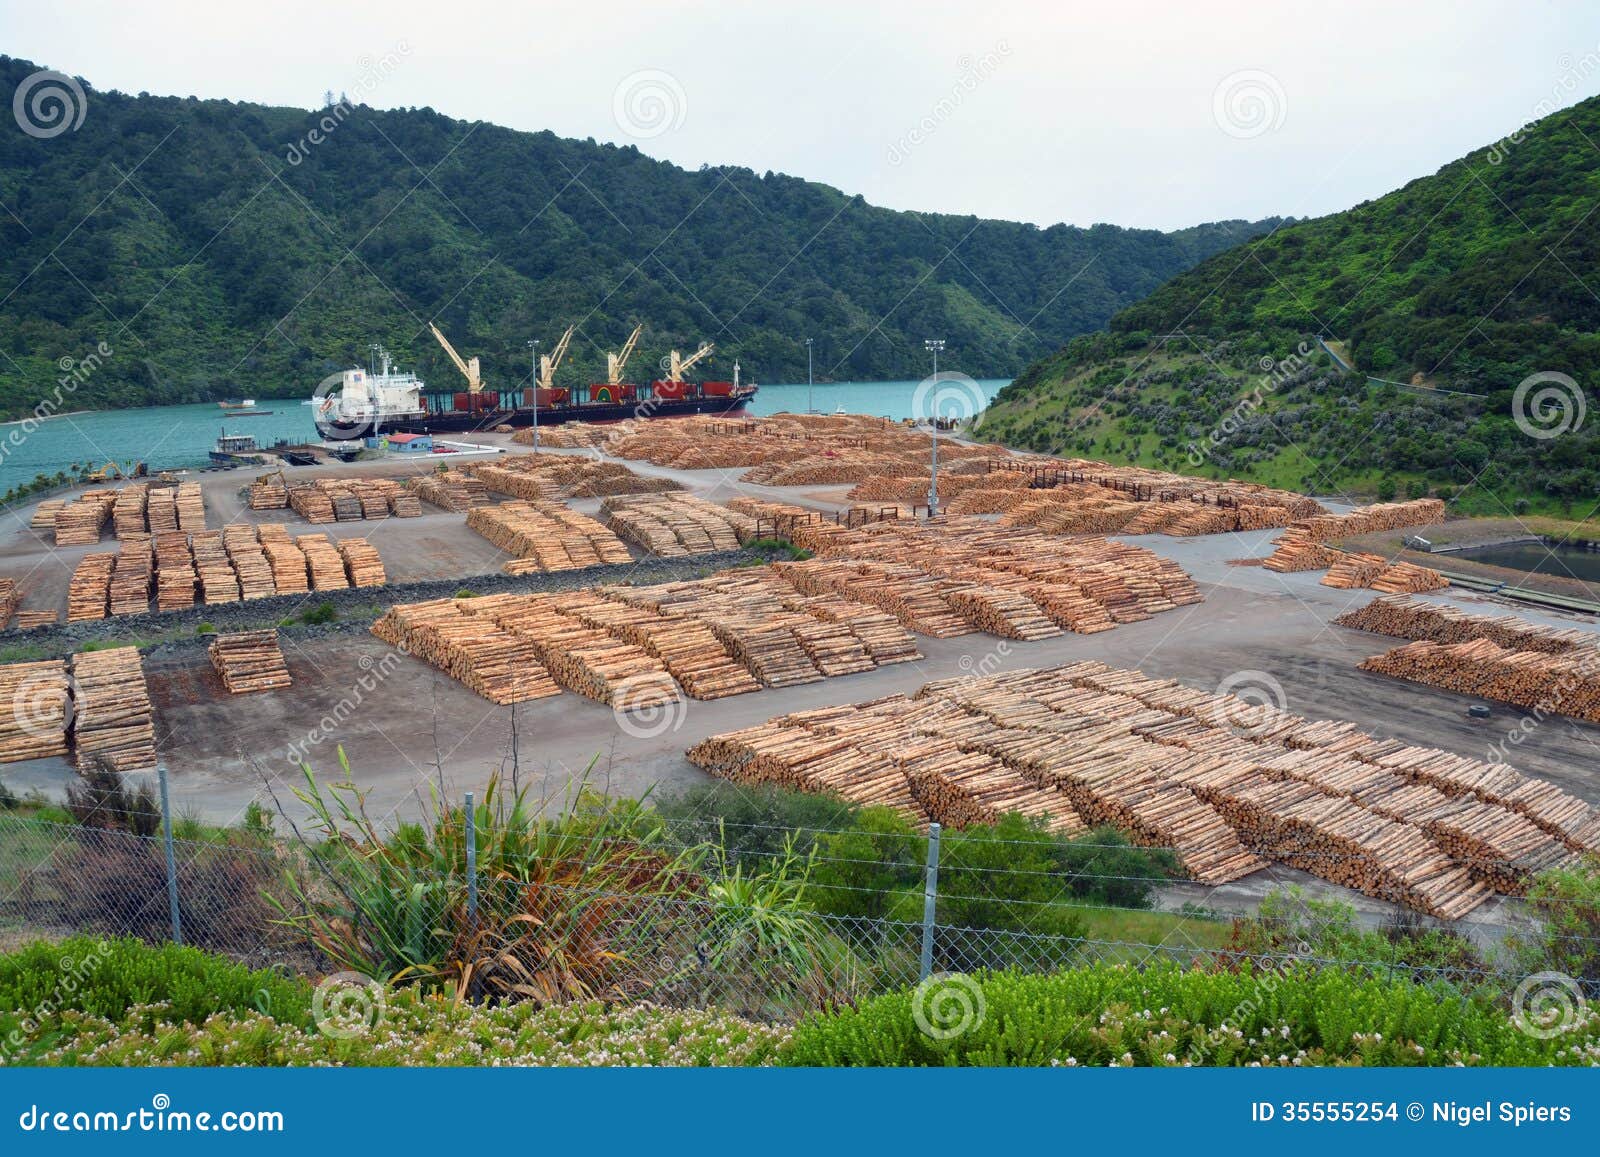 pine log exporting at picton, new zealand